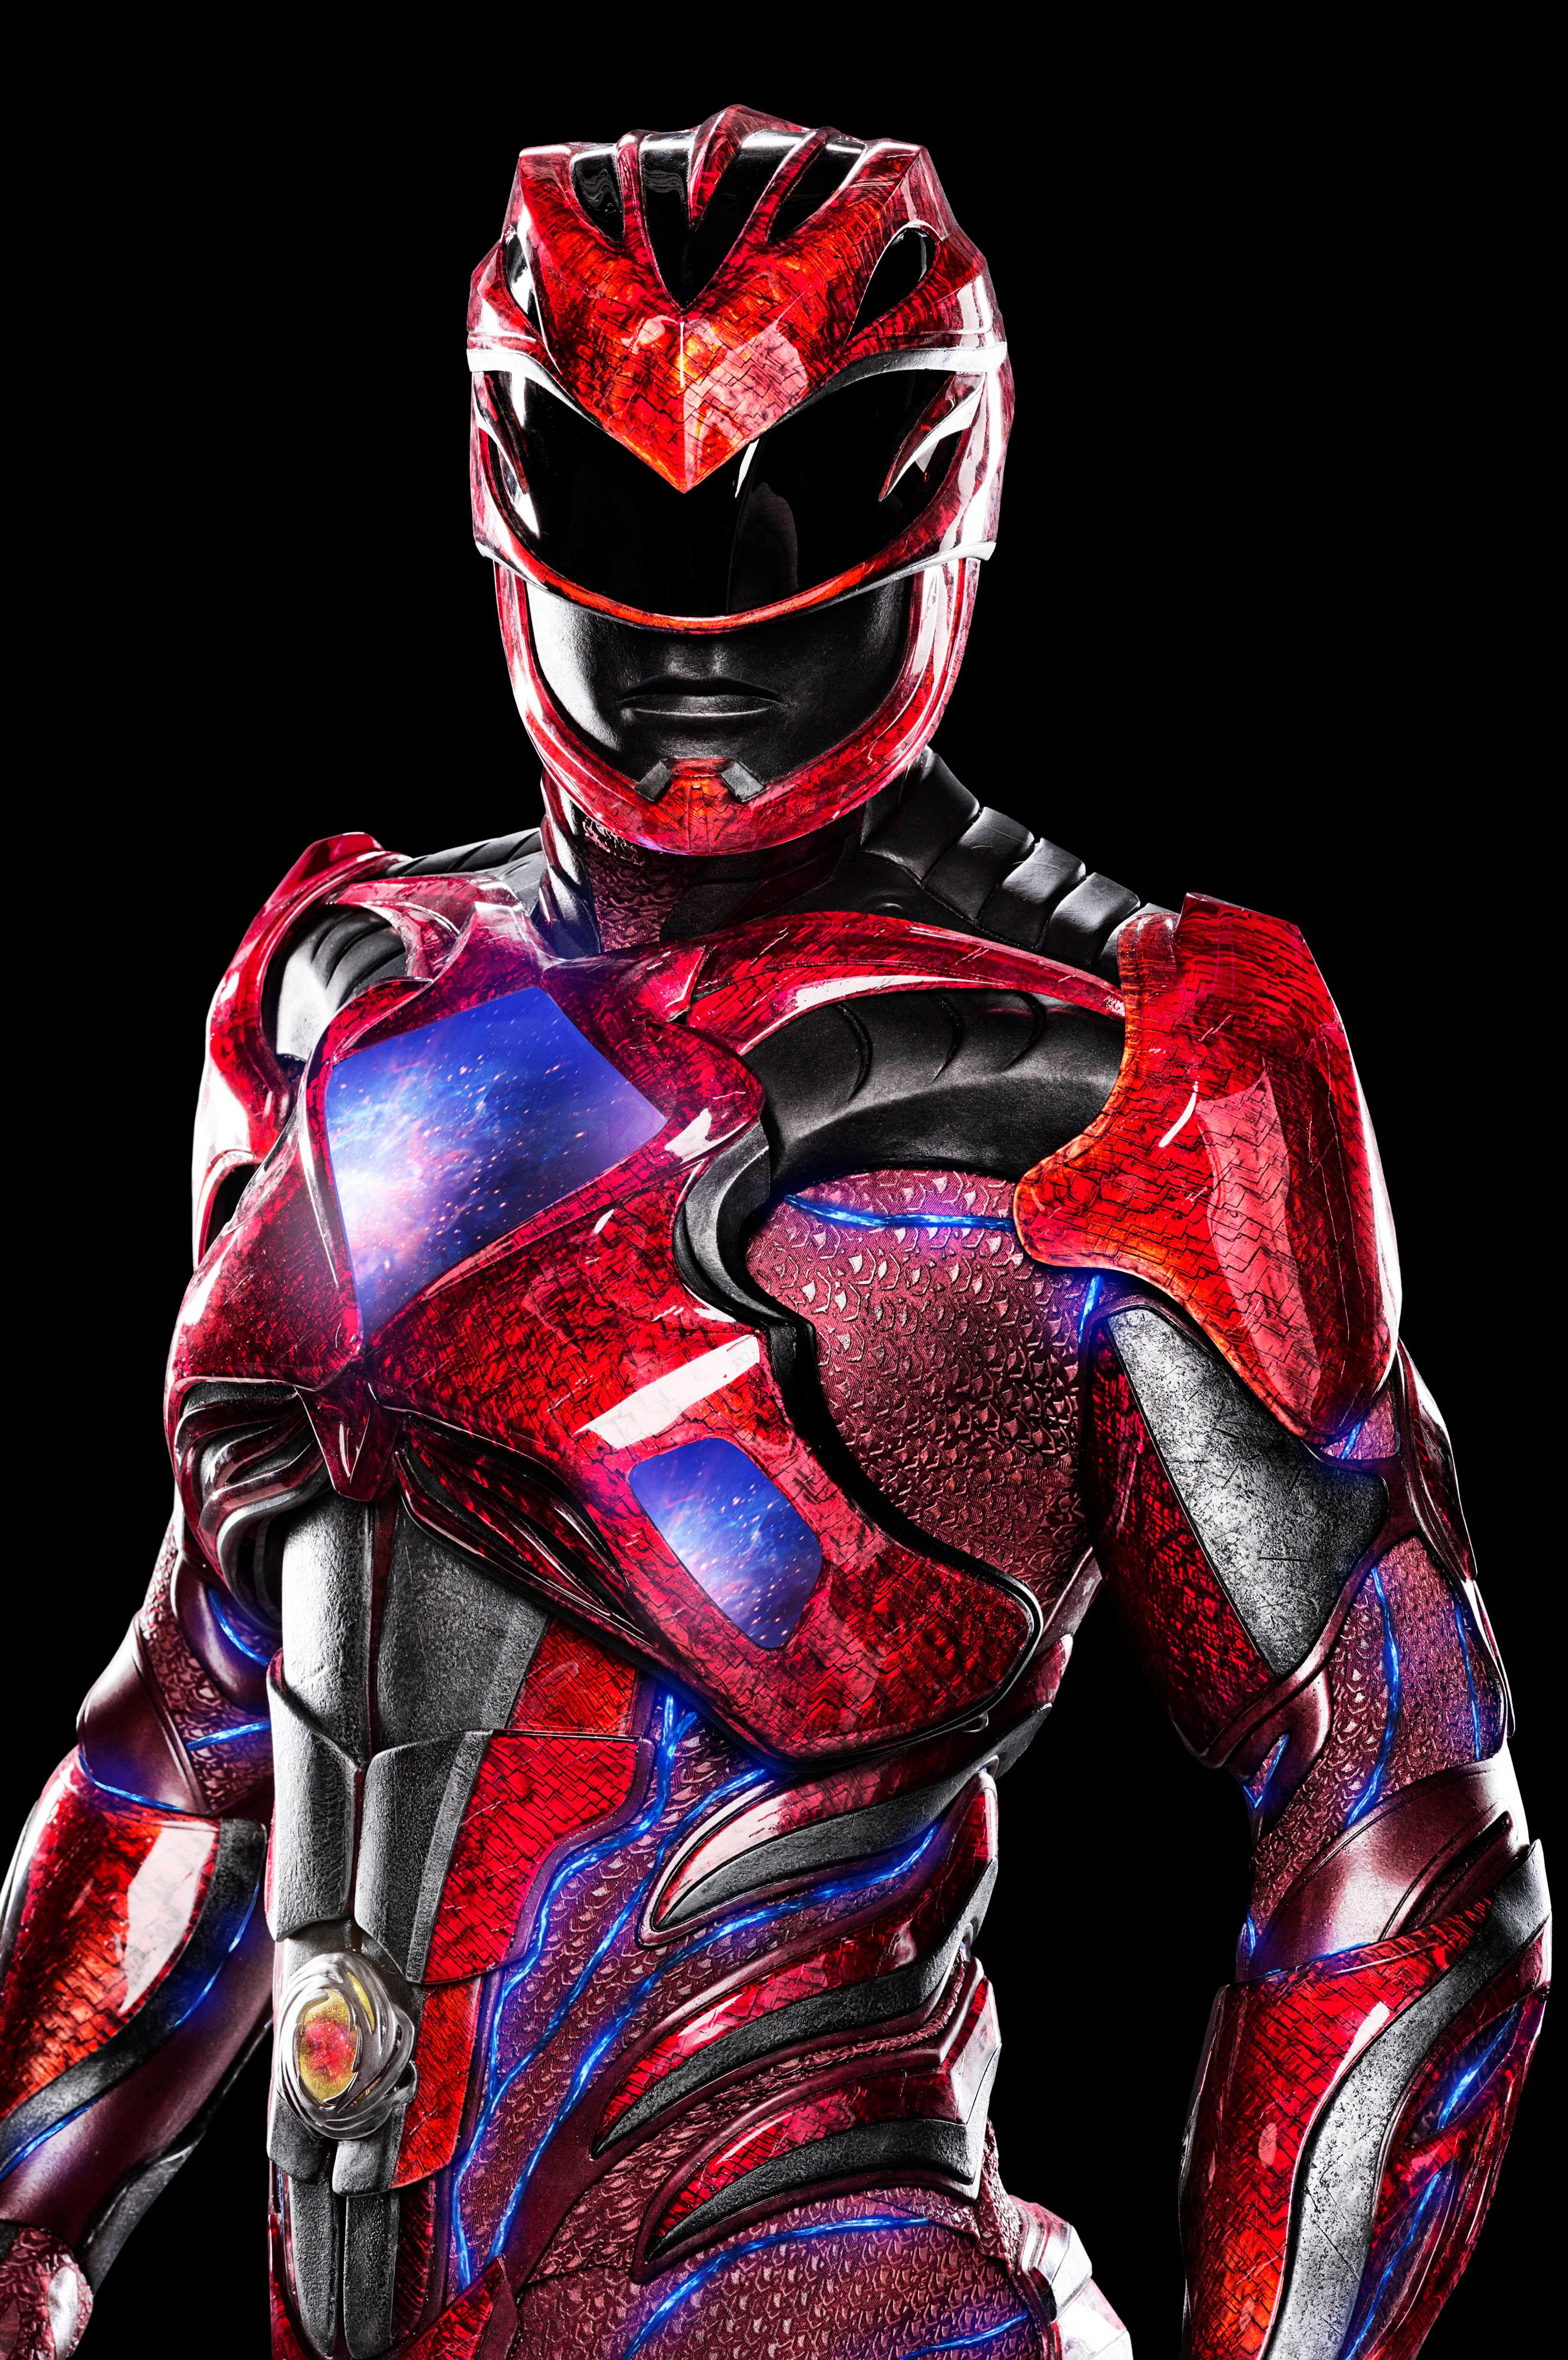 The Power Rangers image Red Ranger HD wallpaper and background